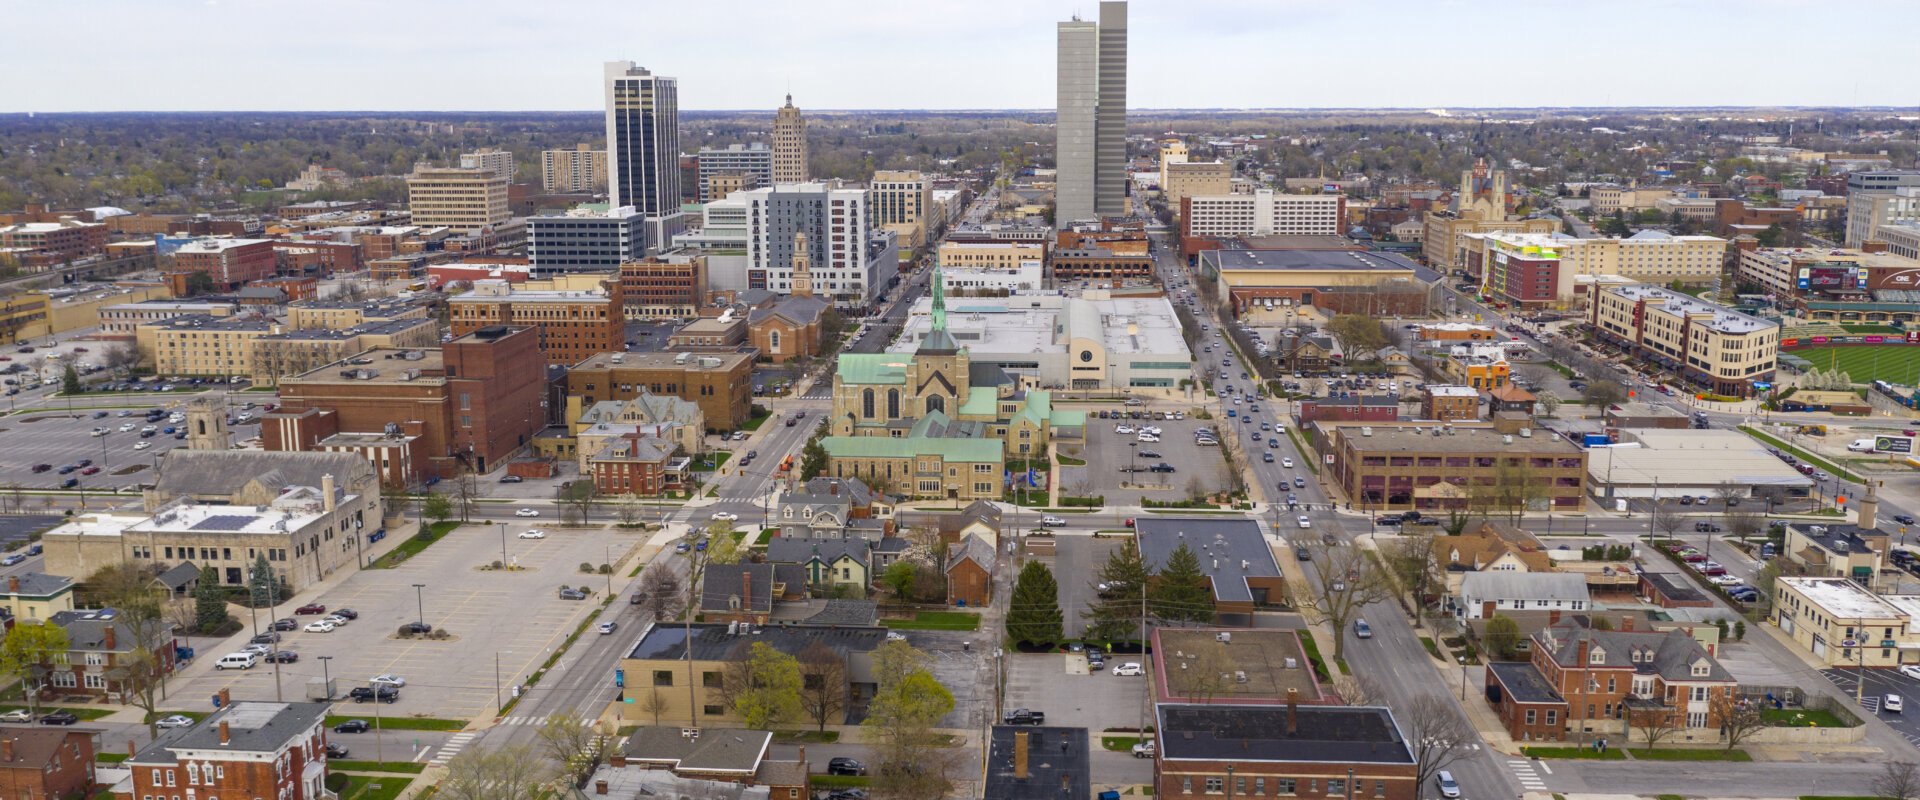 An aerial photo of Fort Wayne, Indiana